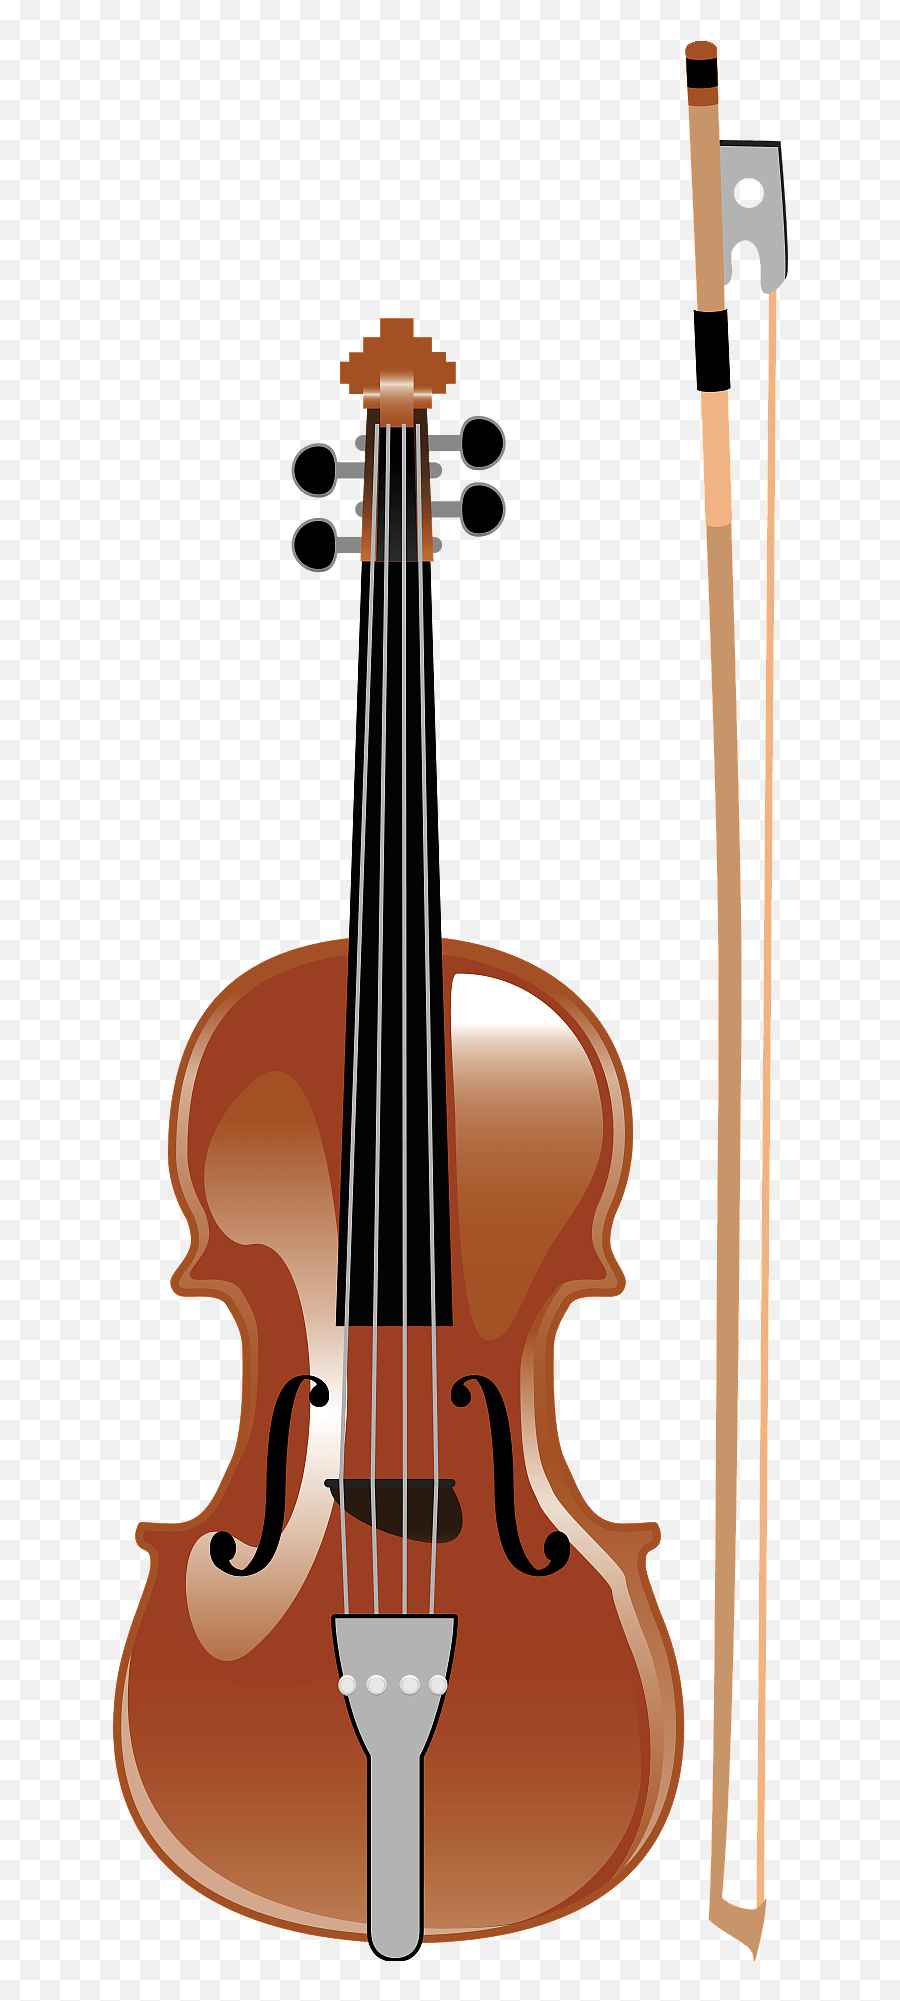 Violin With Bow Clipart Free Download Transparent Png Emoji,Cello Clipart